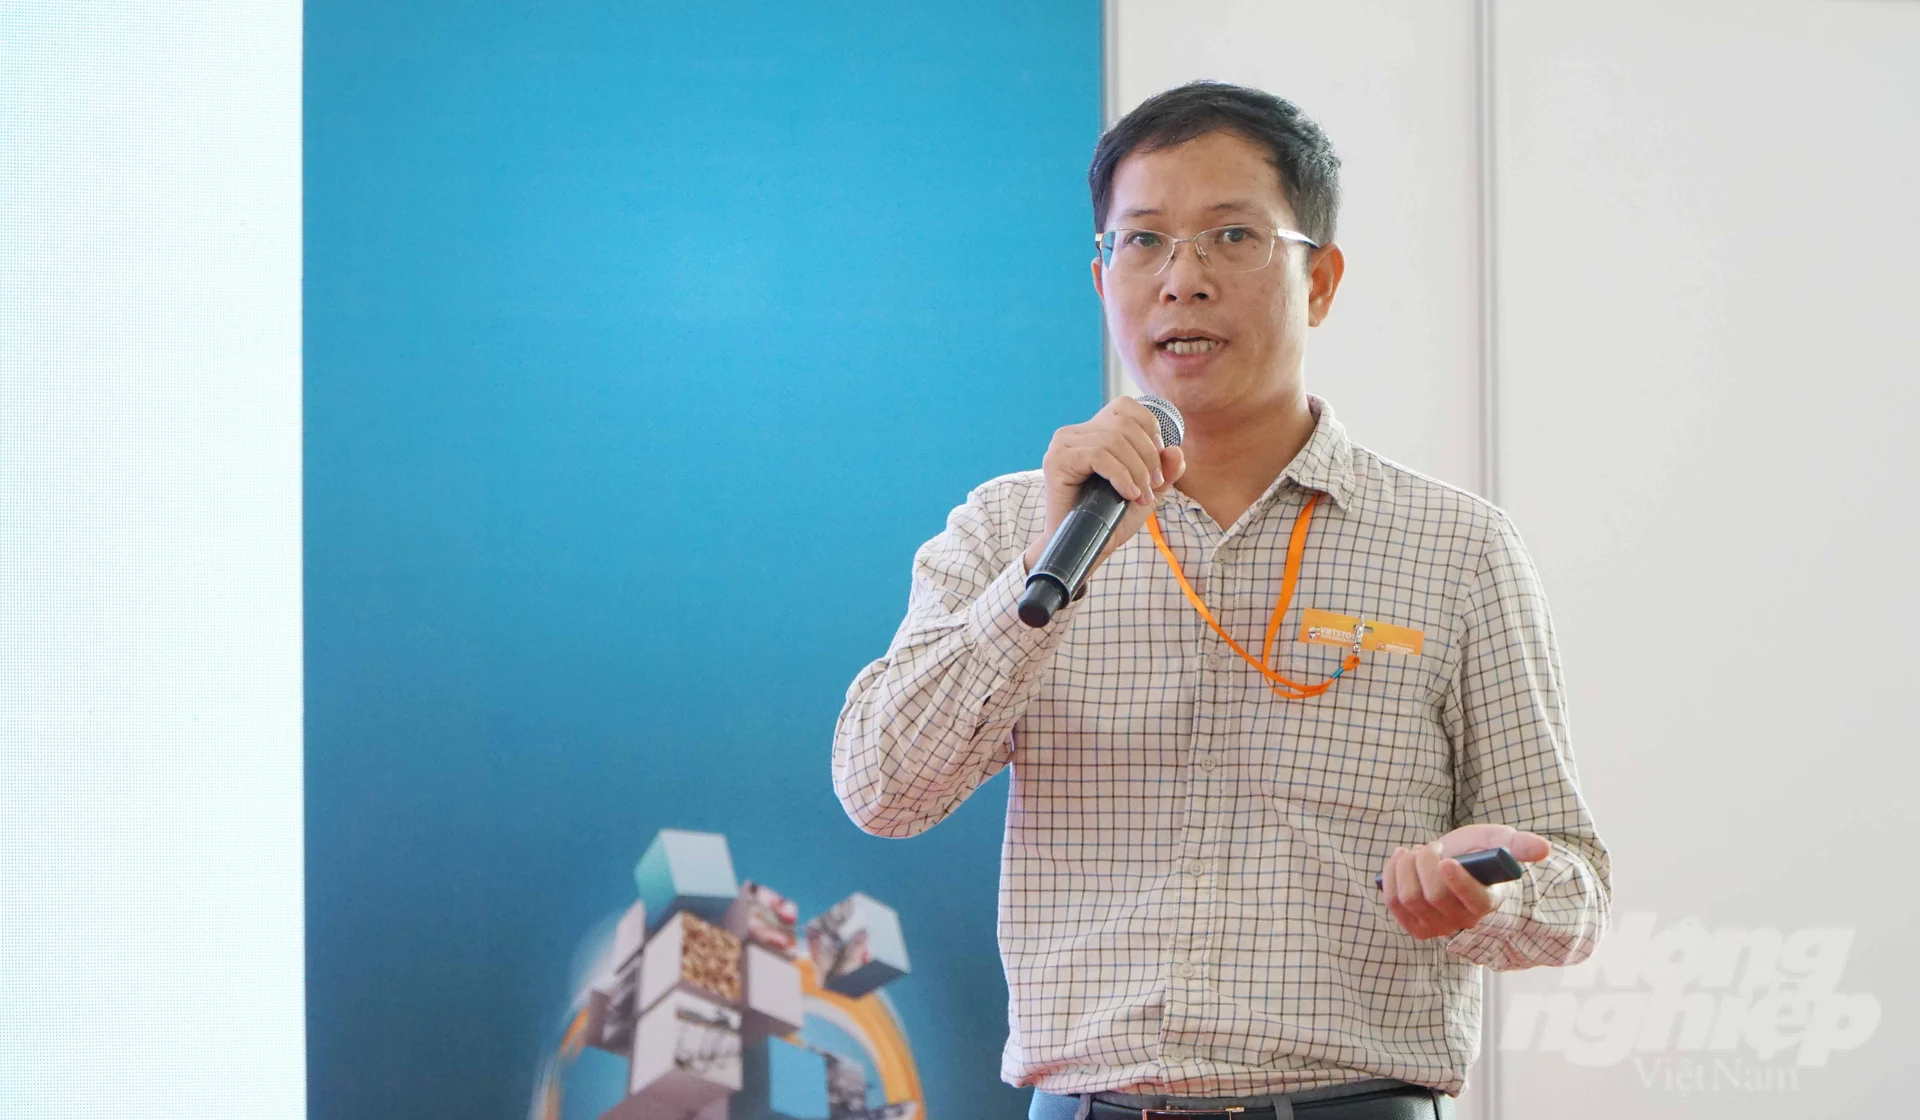 Mr. Phan Trong Vinh, General Director of Nhat Viet Smart Future Joint Stock Company. Photo: Le Binh.